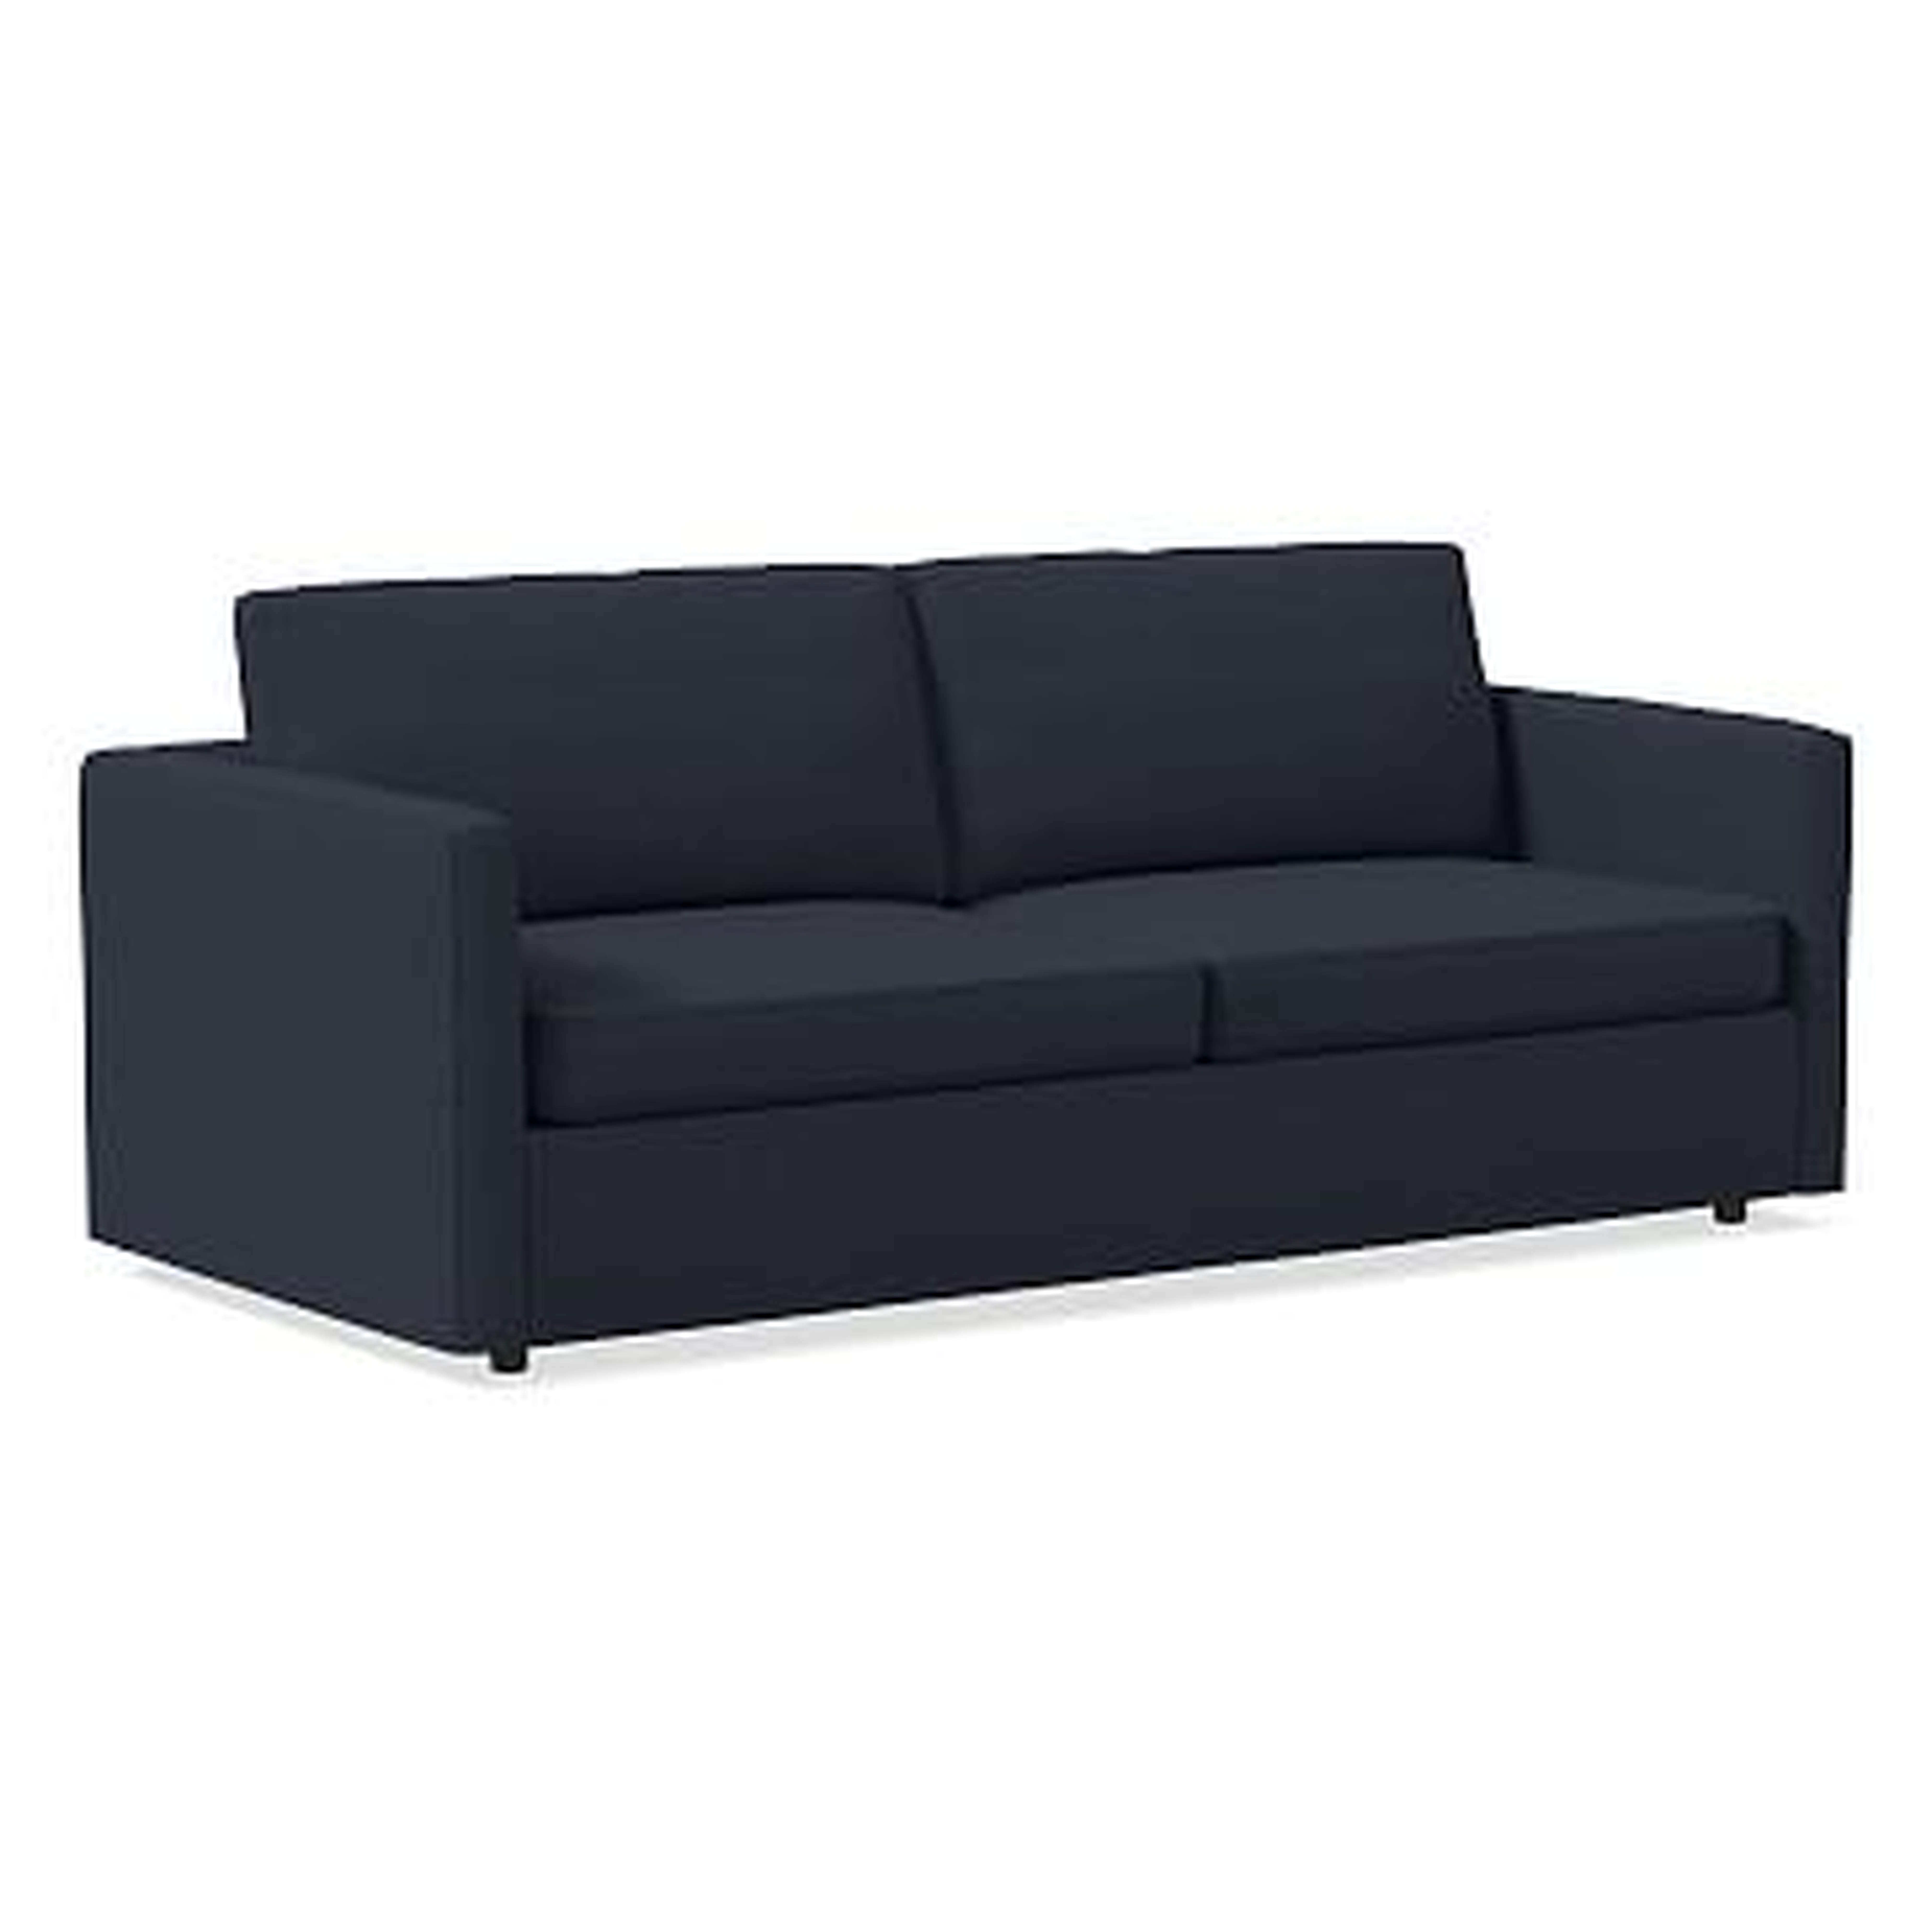 Harris 86" Sofa, Poly, Performance Yarn Dyed Linen Weave, Indigo, Concealed Supports - West Elm